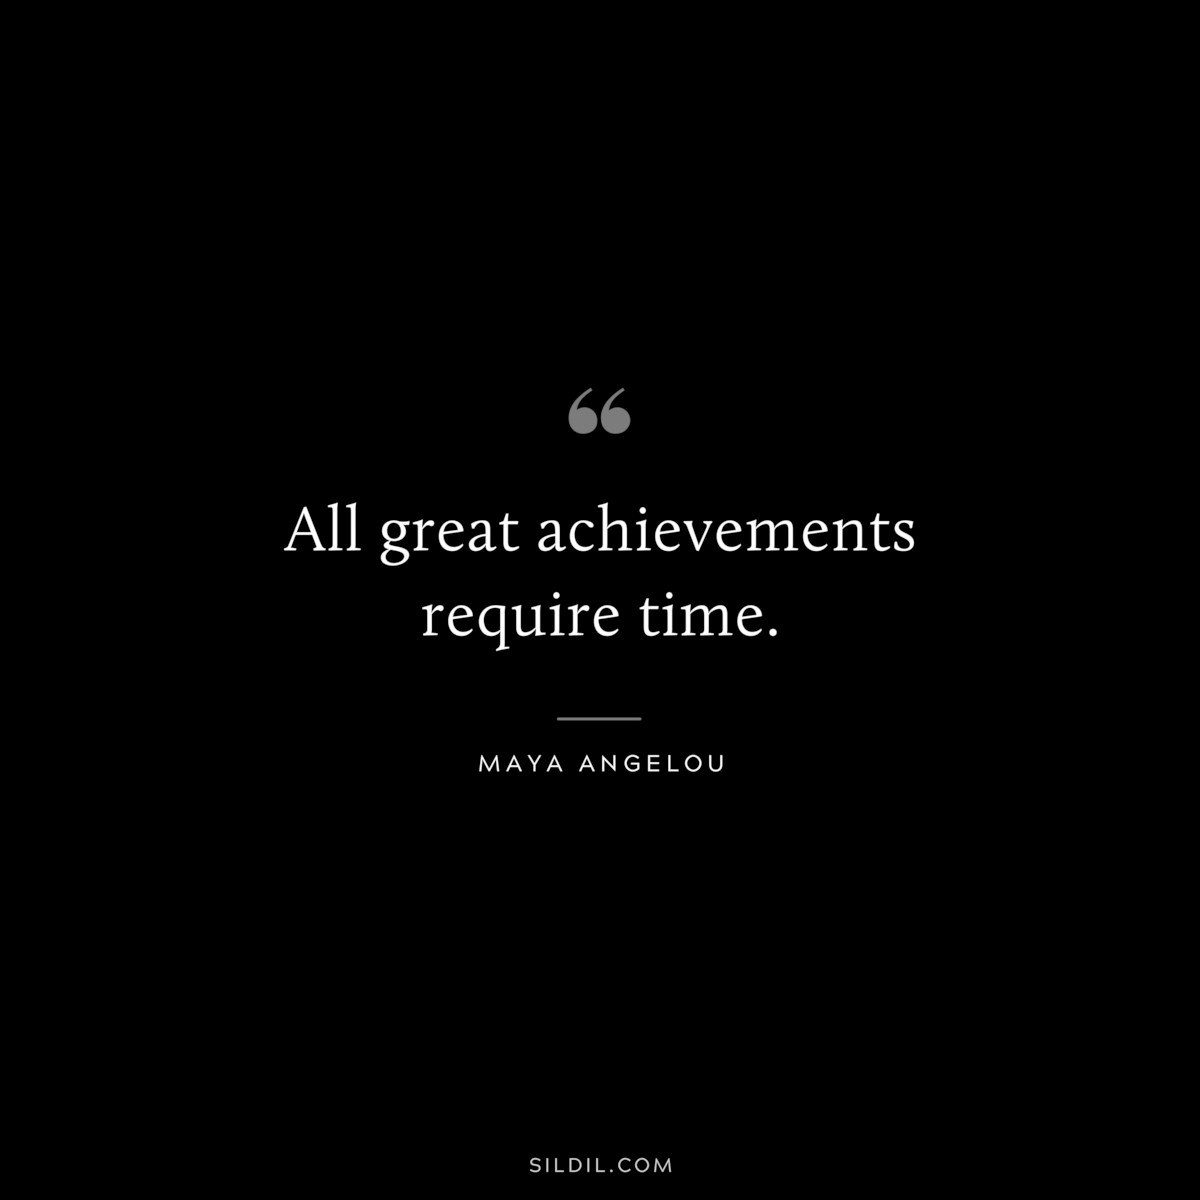 All great achievements require time. ― Maya Angelou